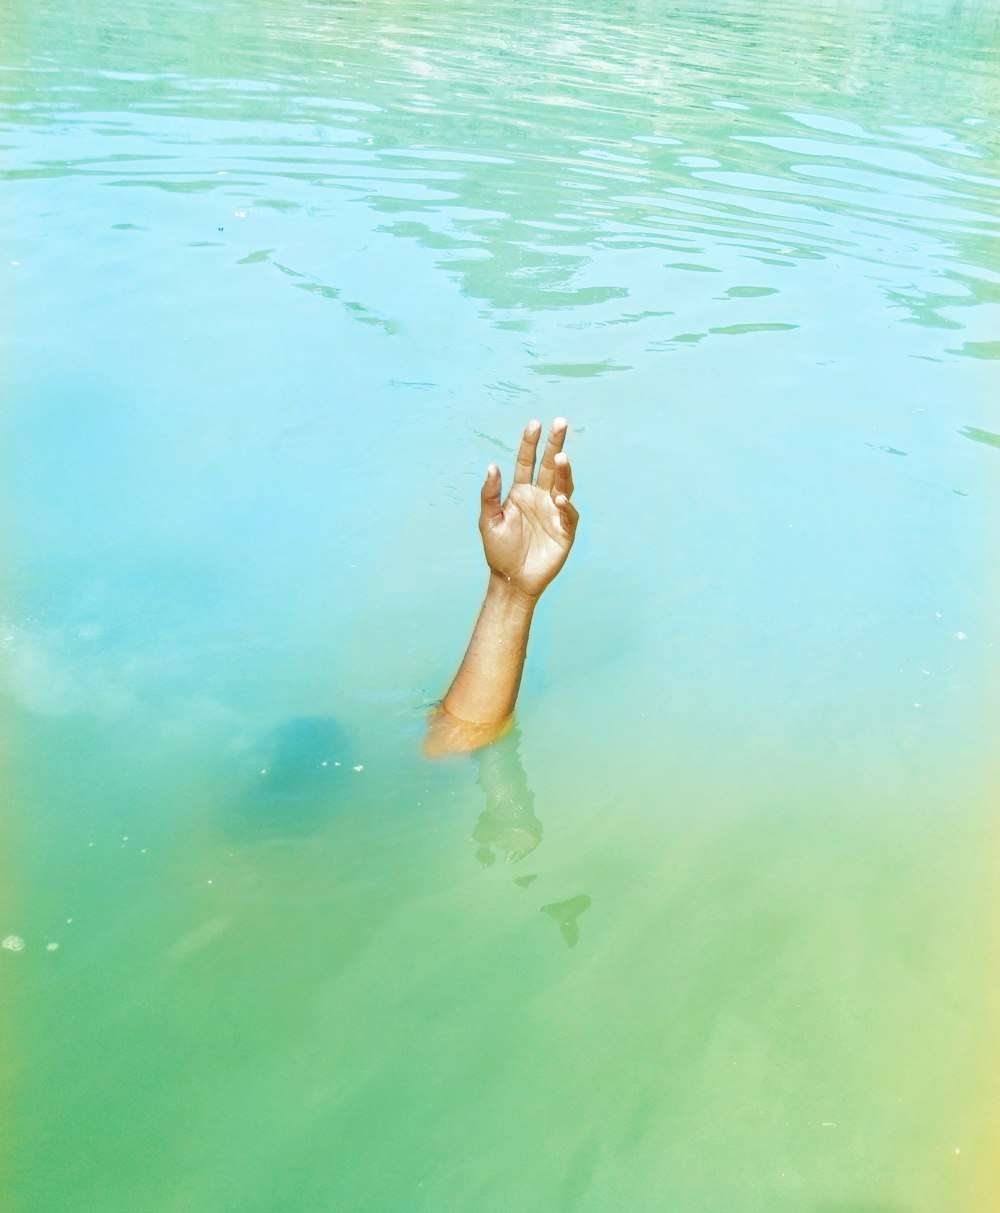 a hand reaching out of the water to catch a frisbee